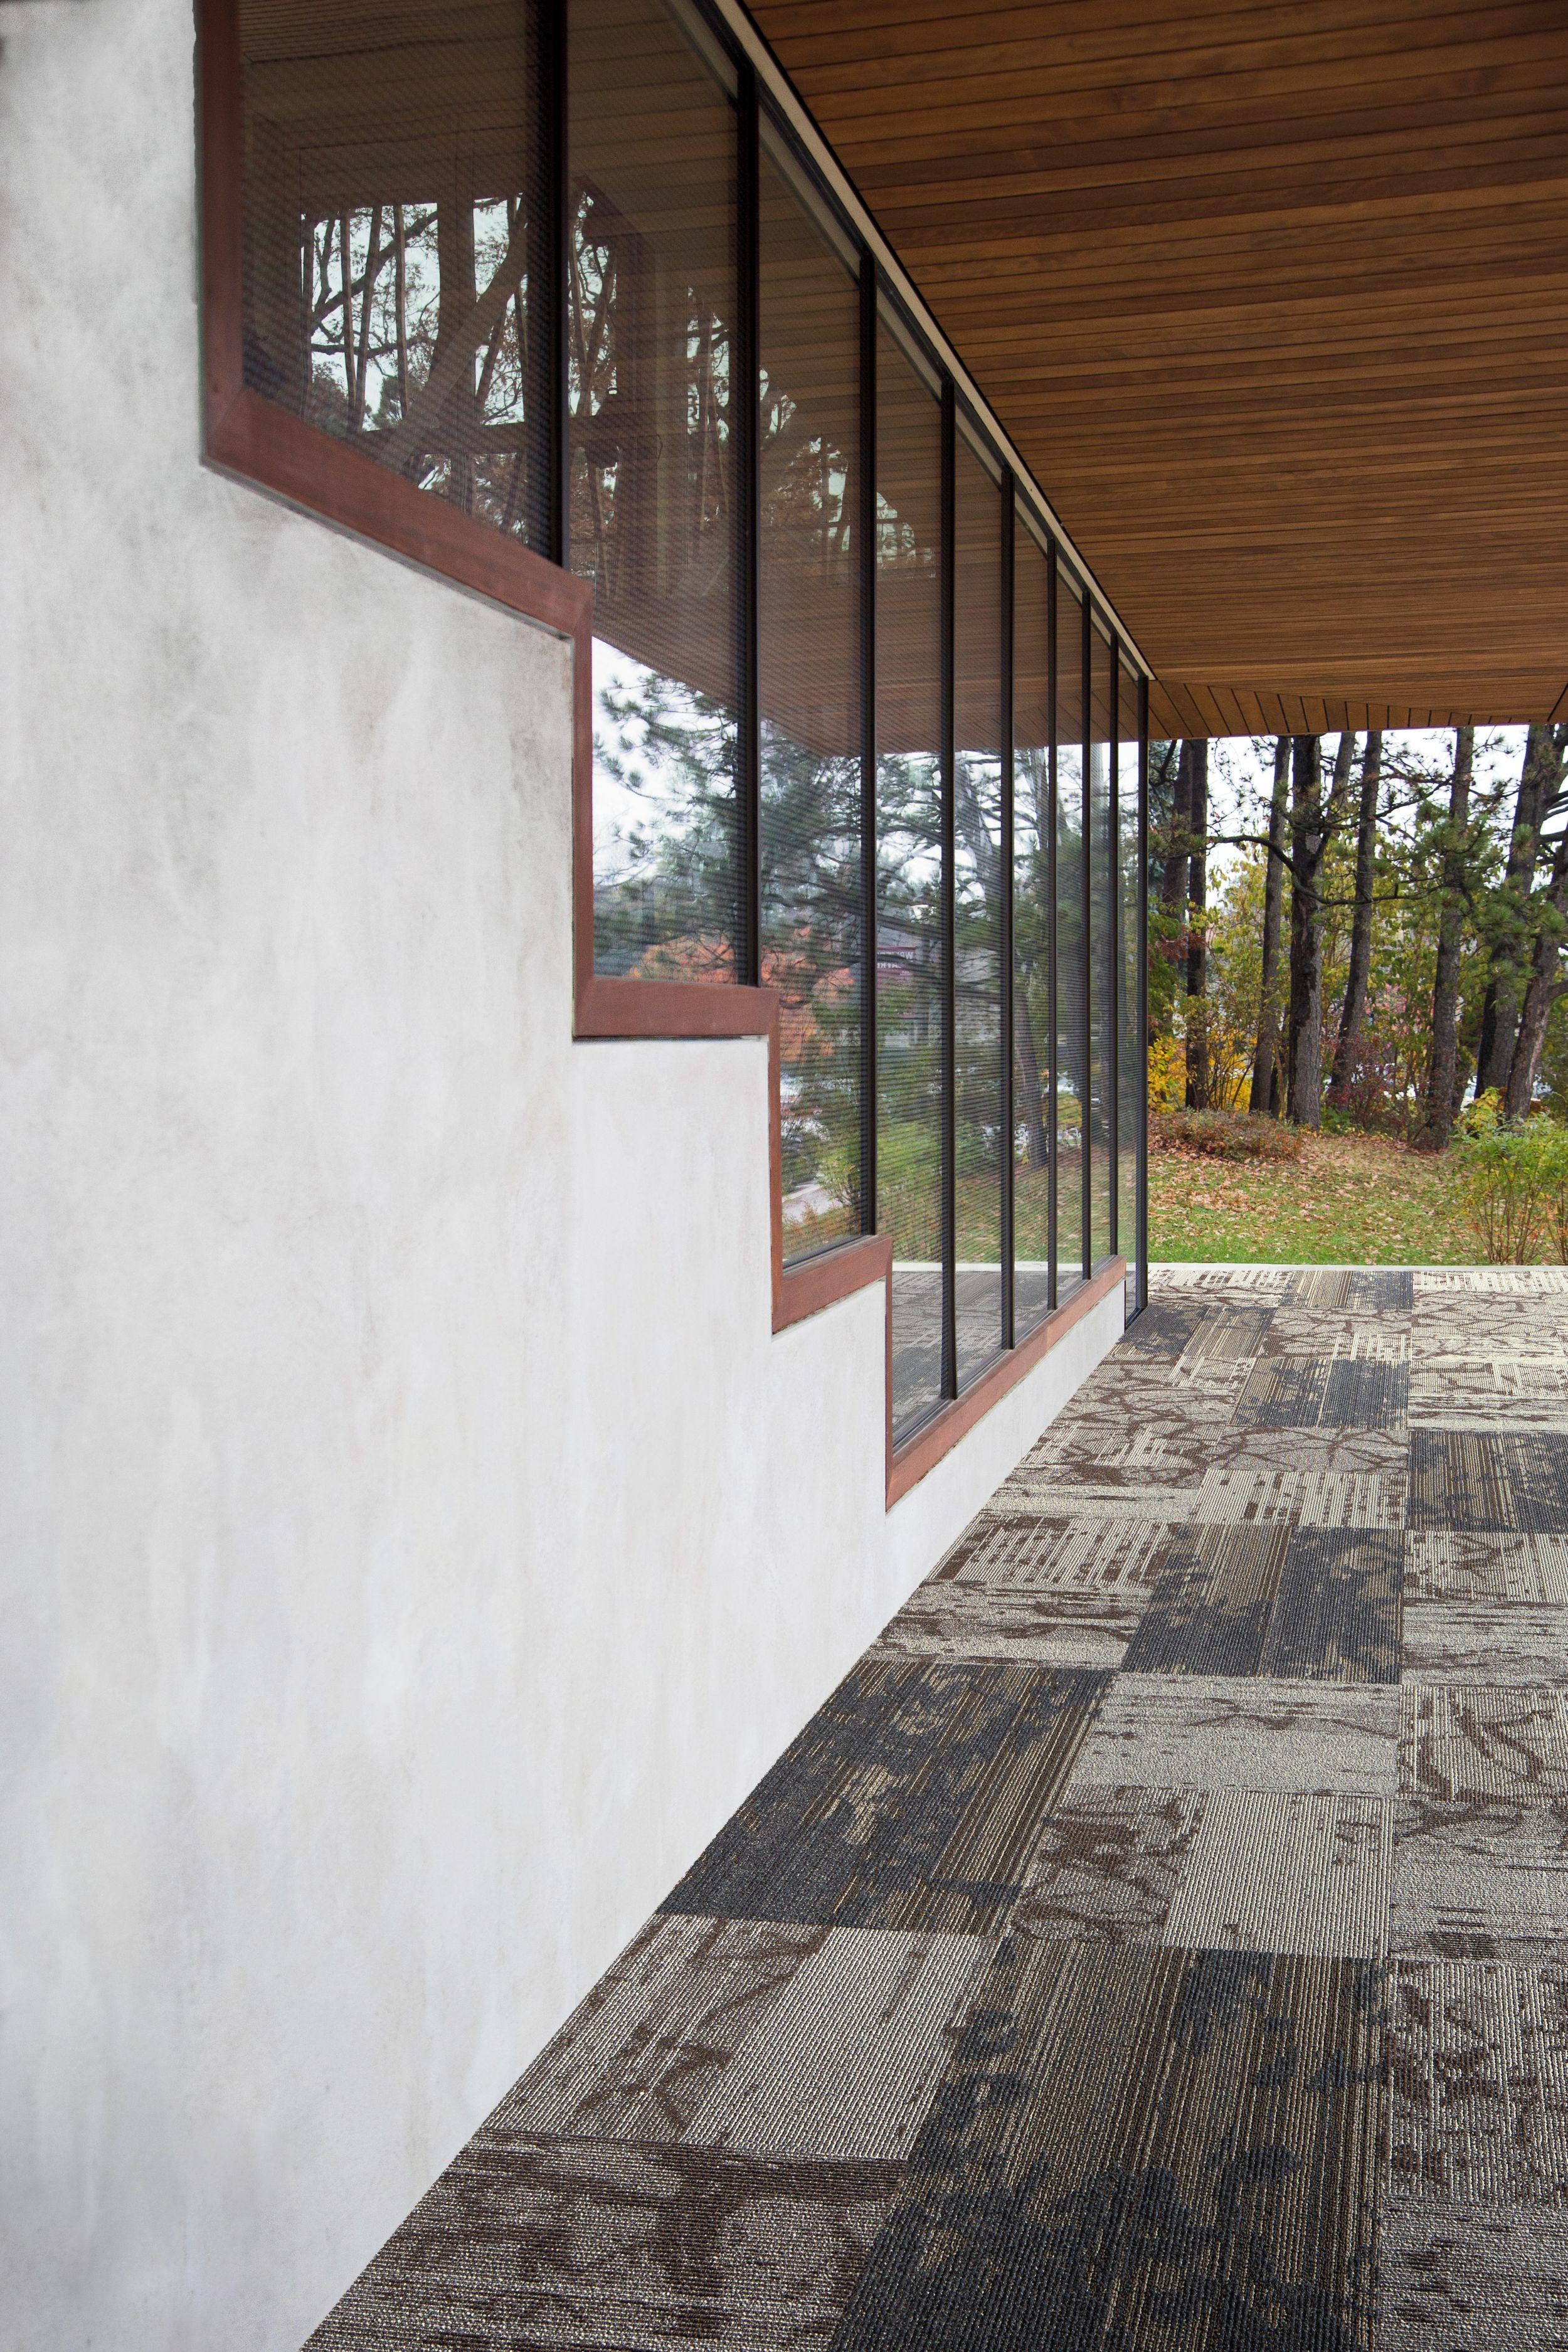 Interface Glazing and Ground plank carpet tile shown for inspiration in outdoor setting imagen número 15